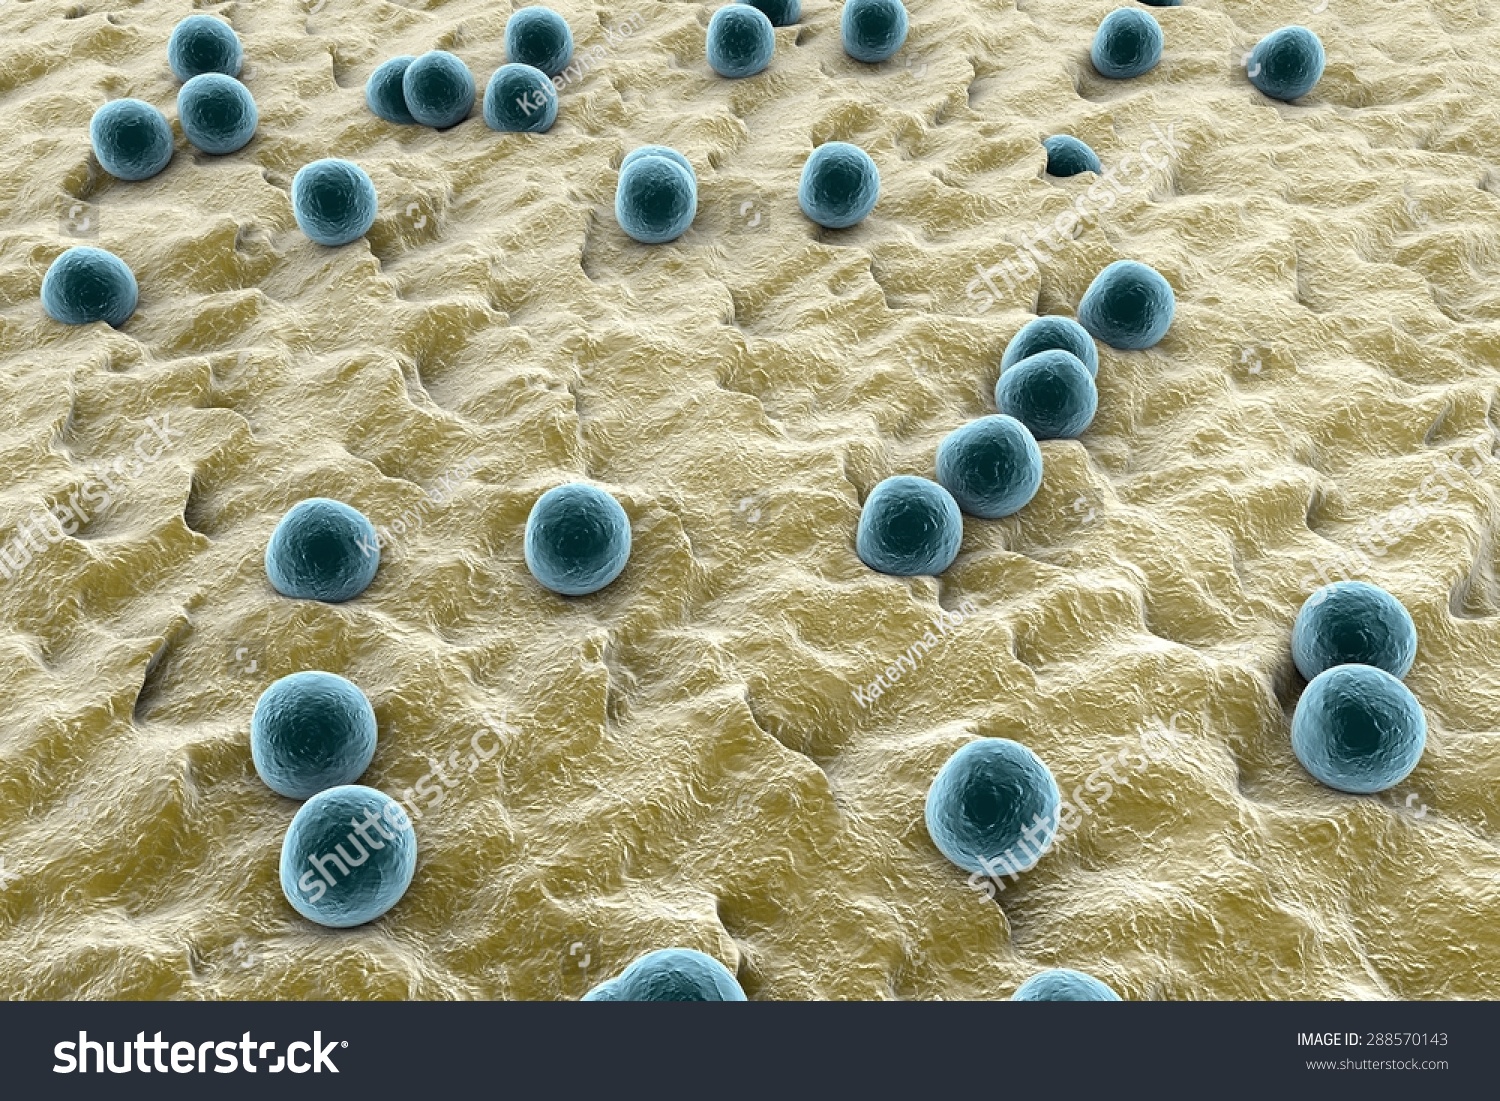 Spherical Bacteria On The Surface Of Skin Or Mucous Membrane; Model Of ...